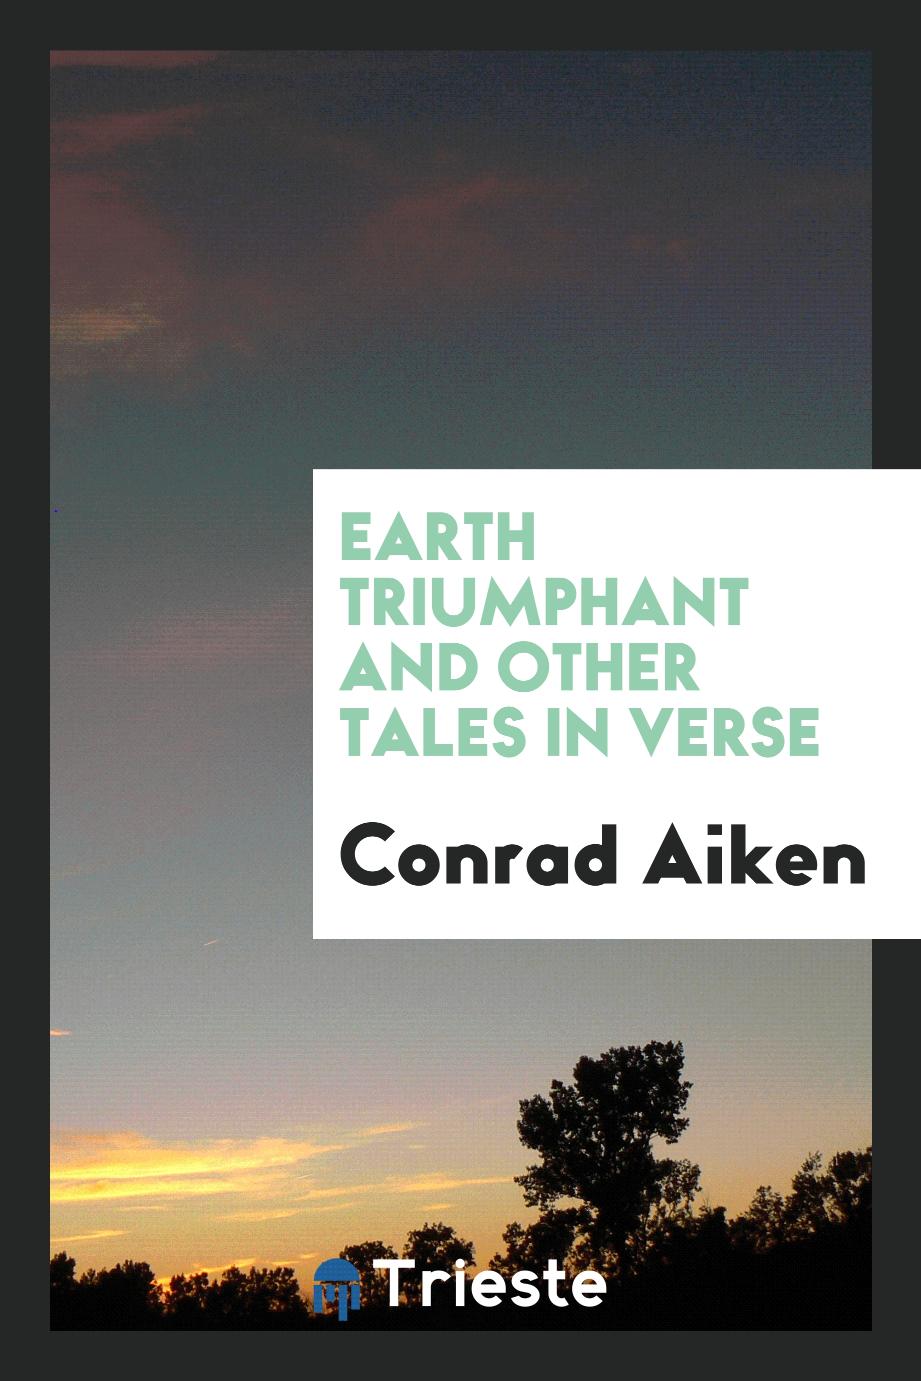 Earth triumphant and other tales in verse